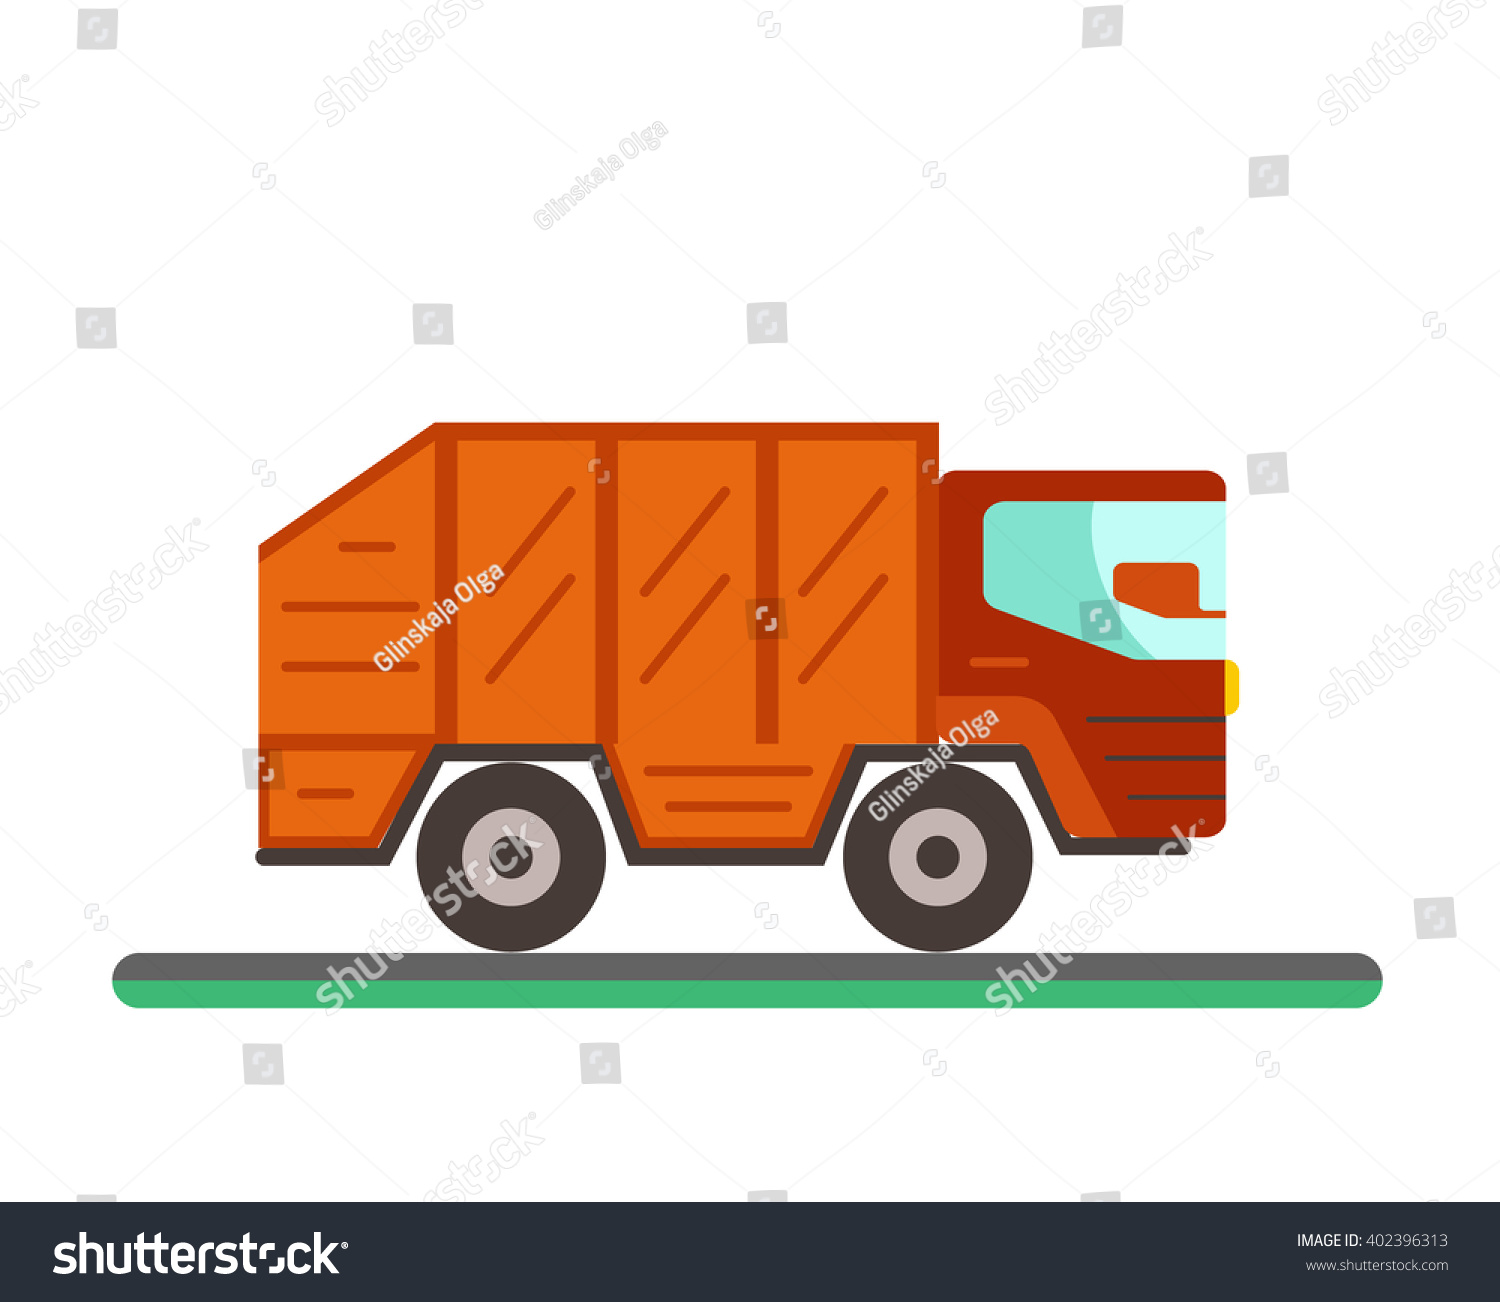 SVG of Garbage truck illustration. Waste disposal flat concept with garbage container truck. City waste disposal management. Waste sorting Garbage truck svg